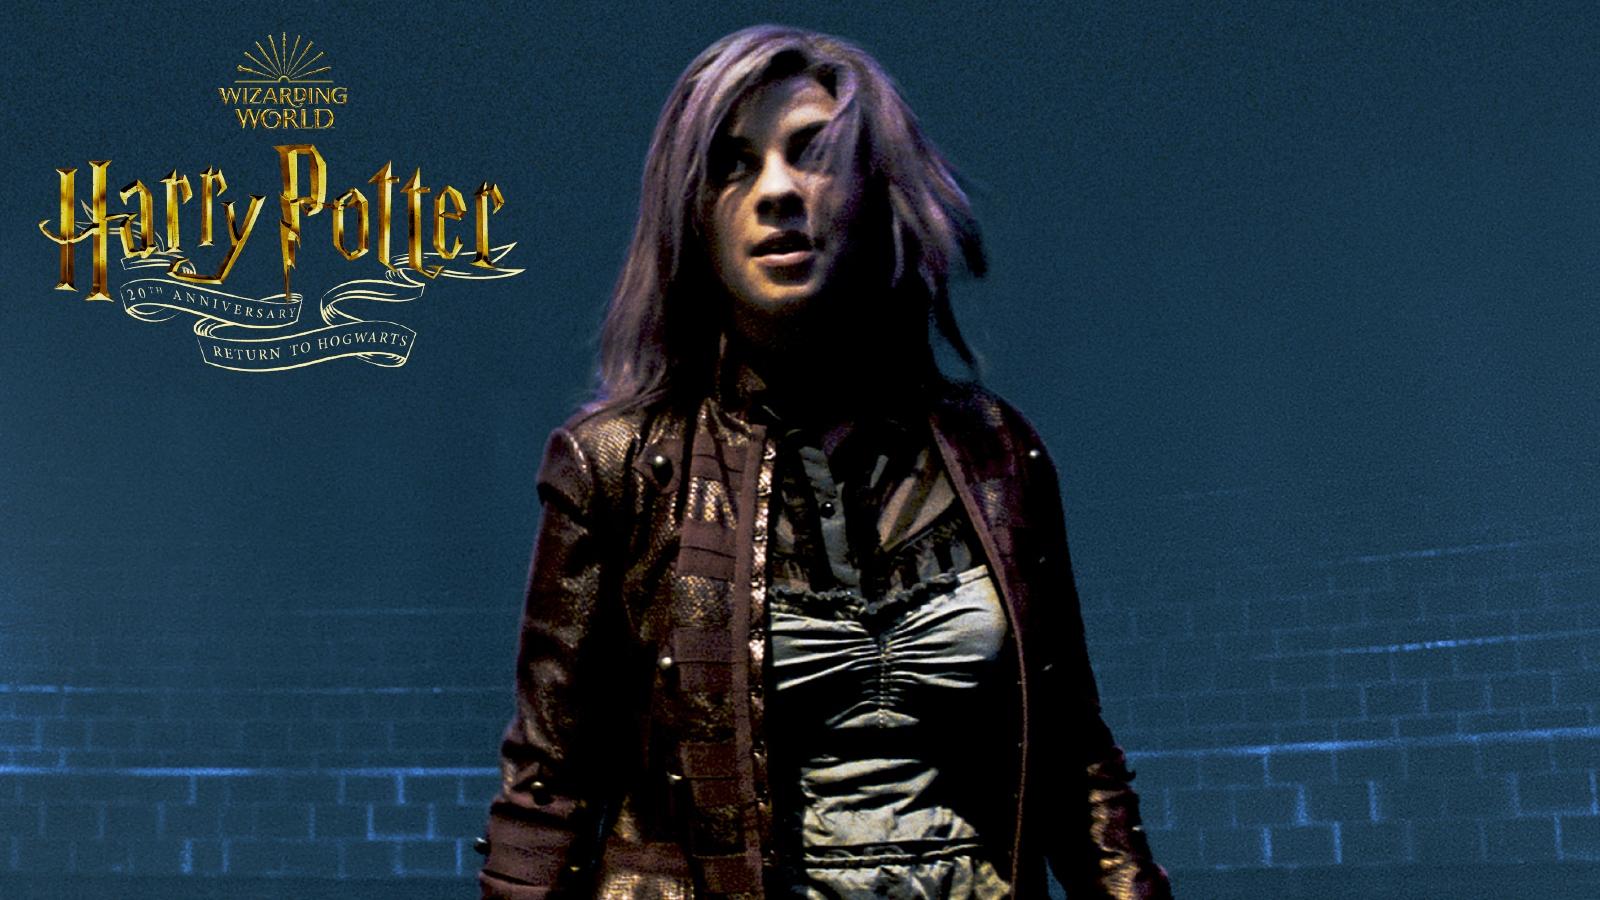 Tonks in Harry Potter and the Order of the Phoenix scene in Ministry of Magic, with Harry Potter logo in top left corner